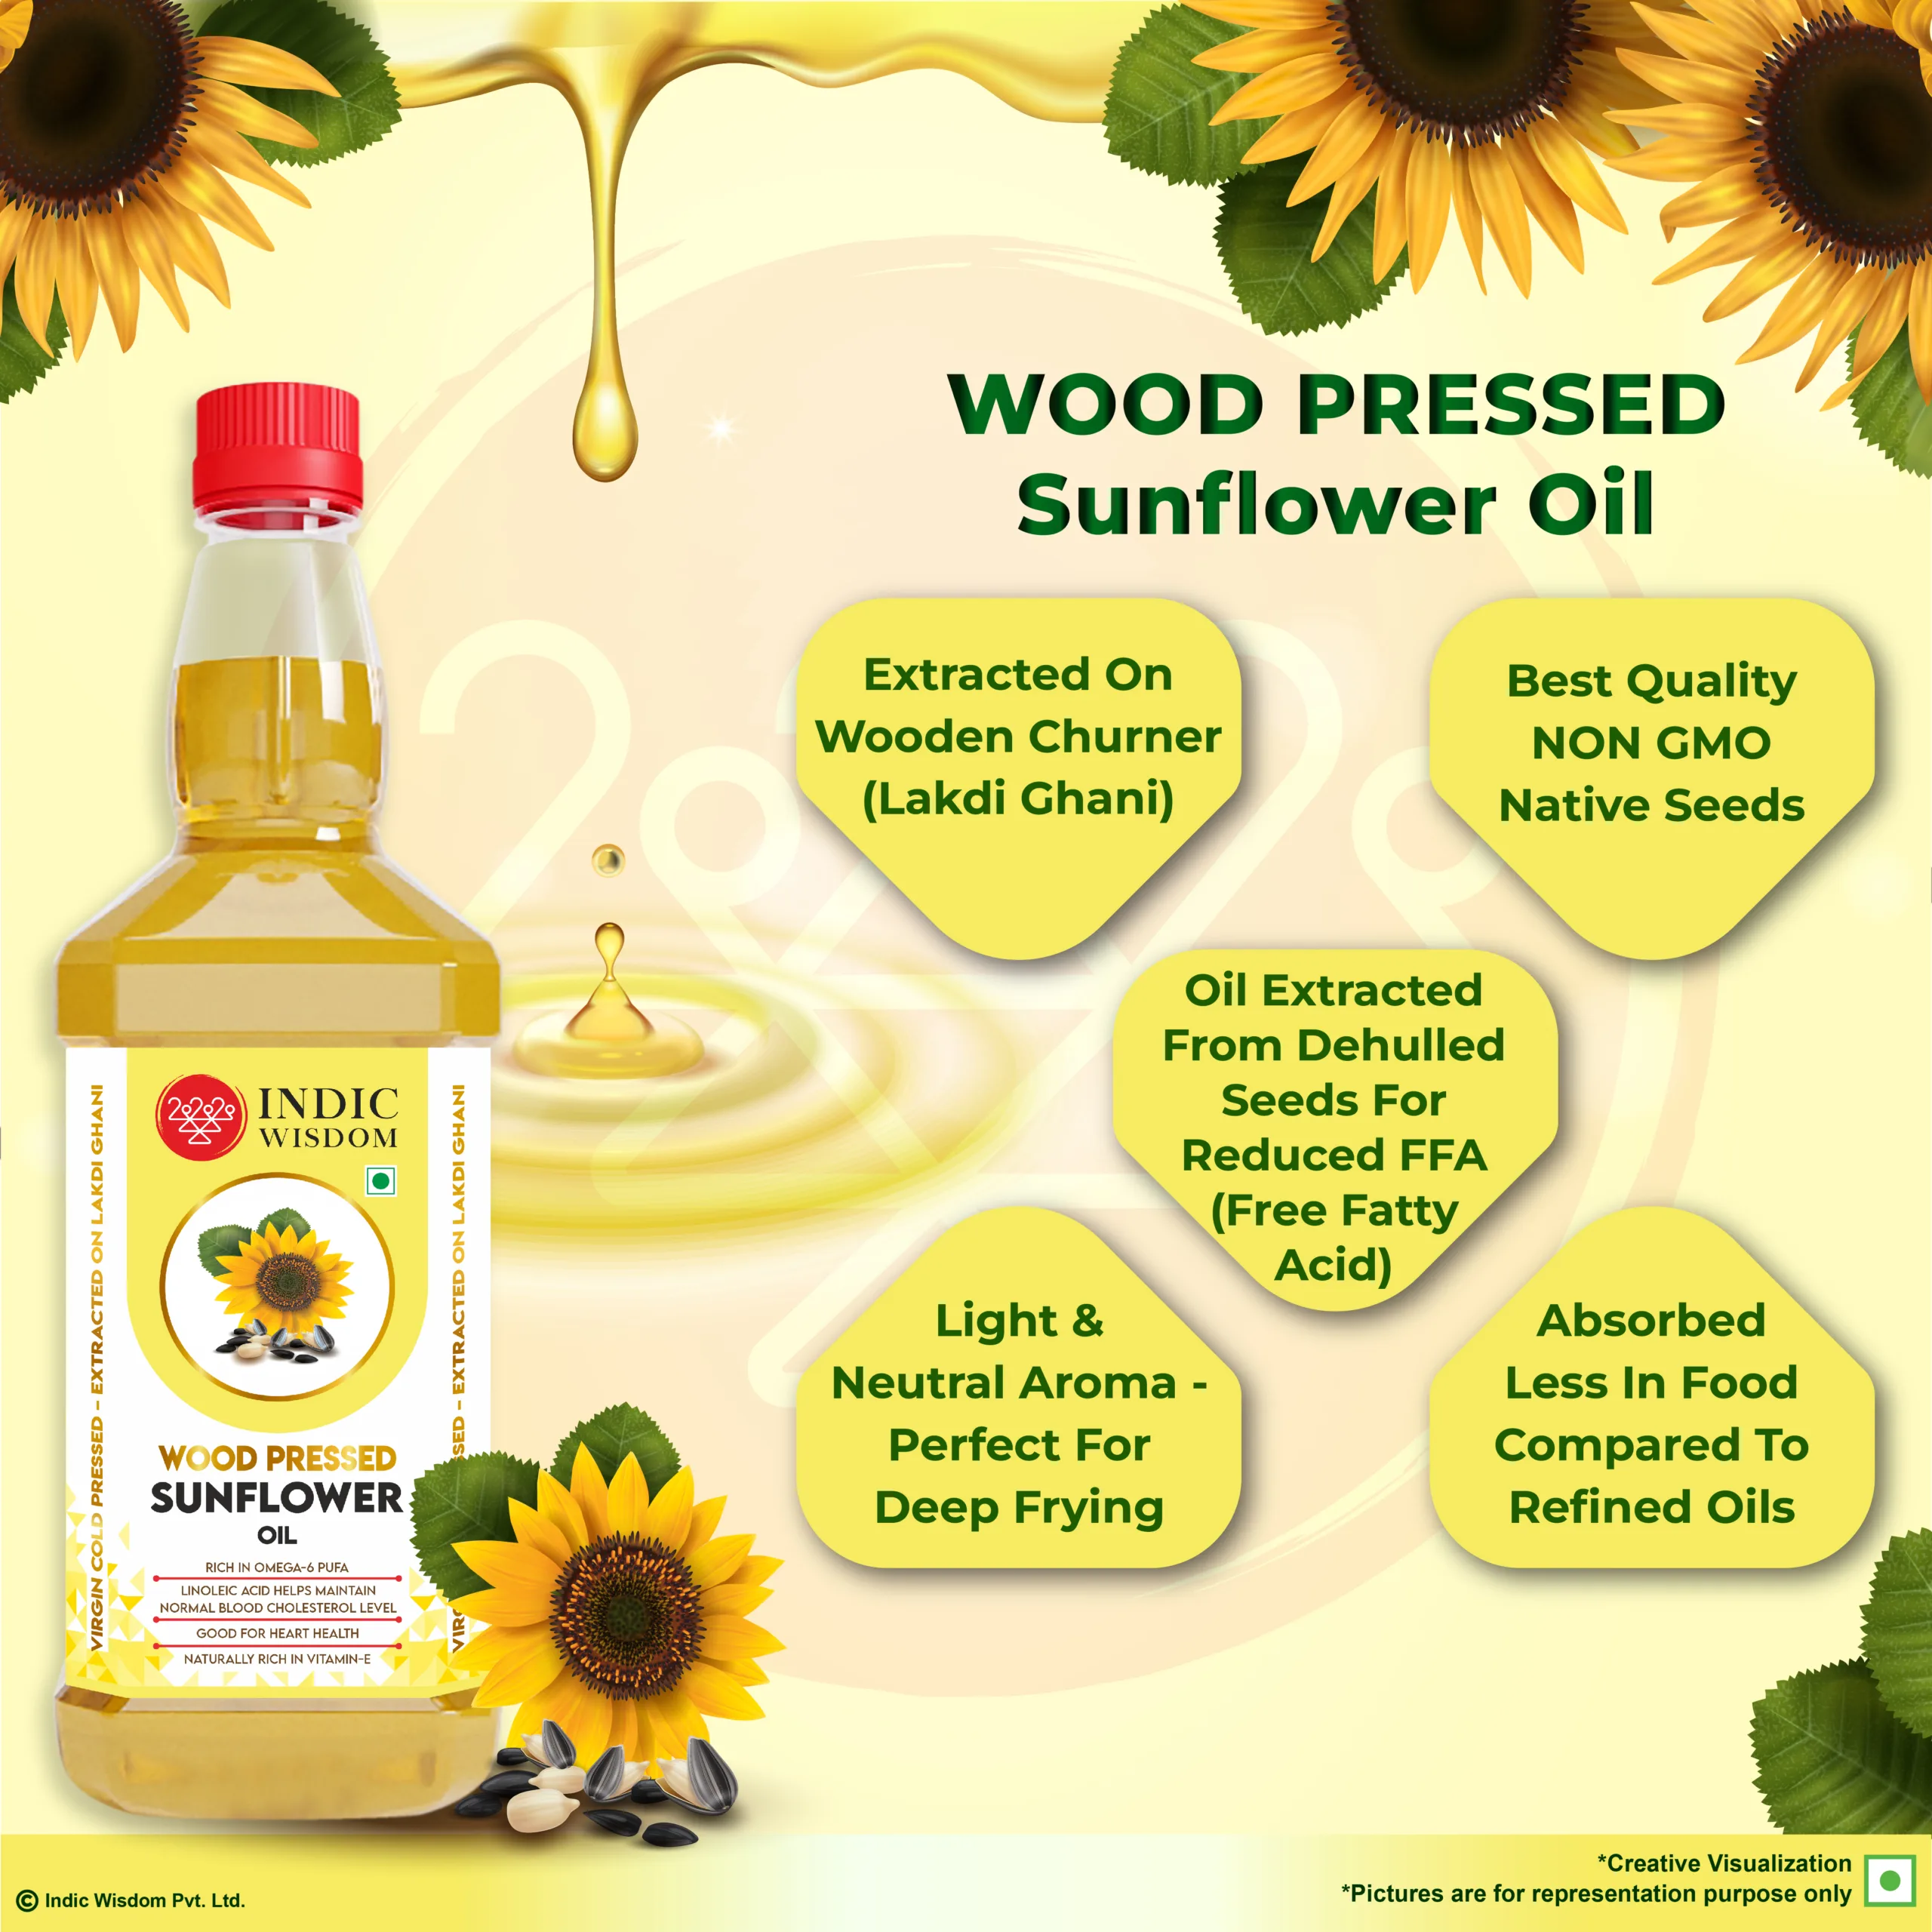 Why buy wood pressed sunflower oil